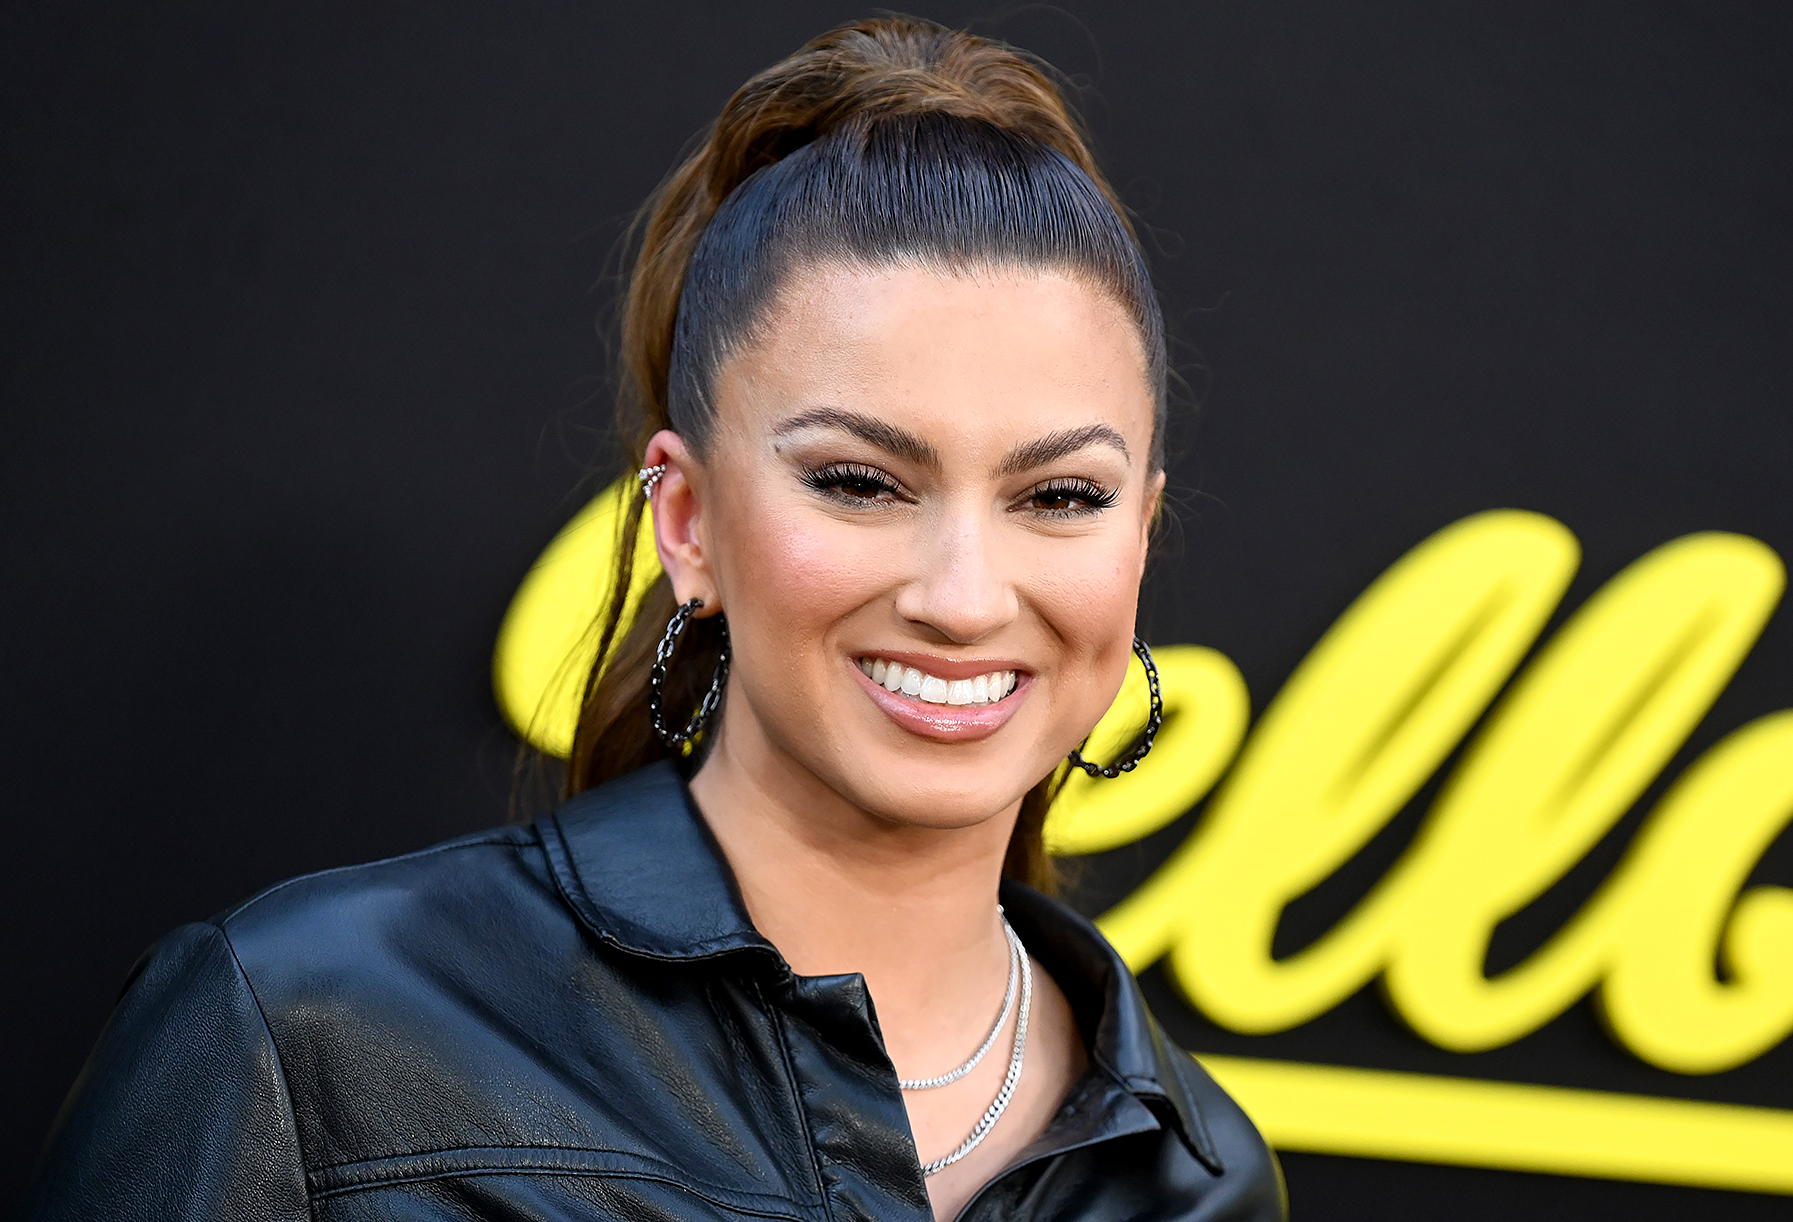 Tori Kelly Announces Tour After Hospitalization: 'Been Too Long!'